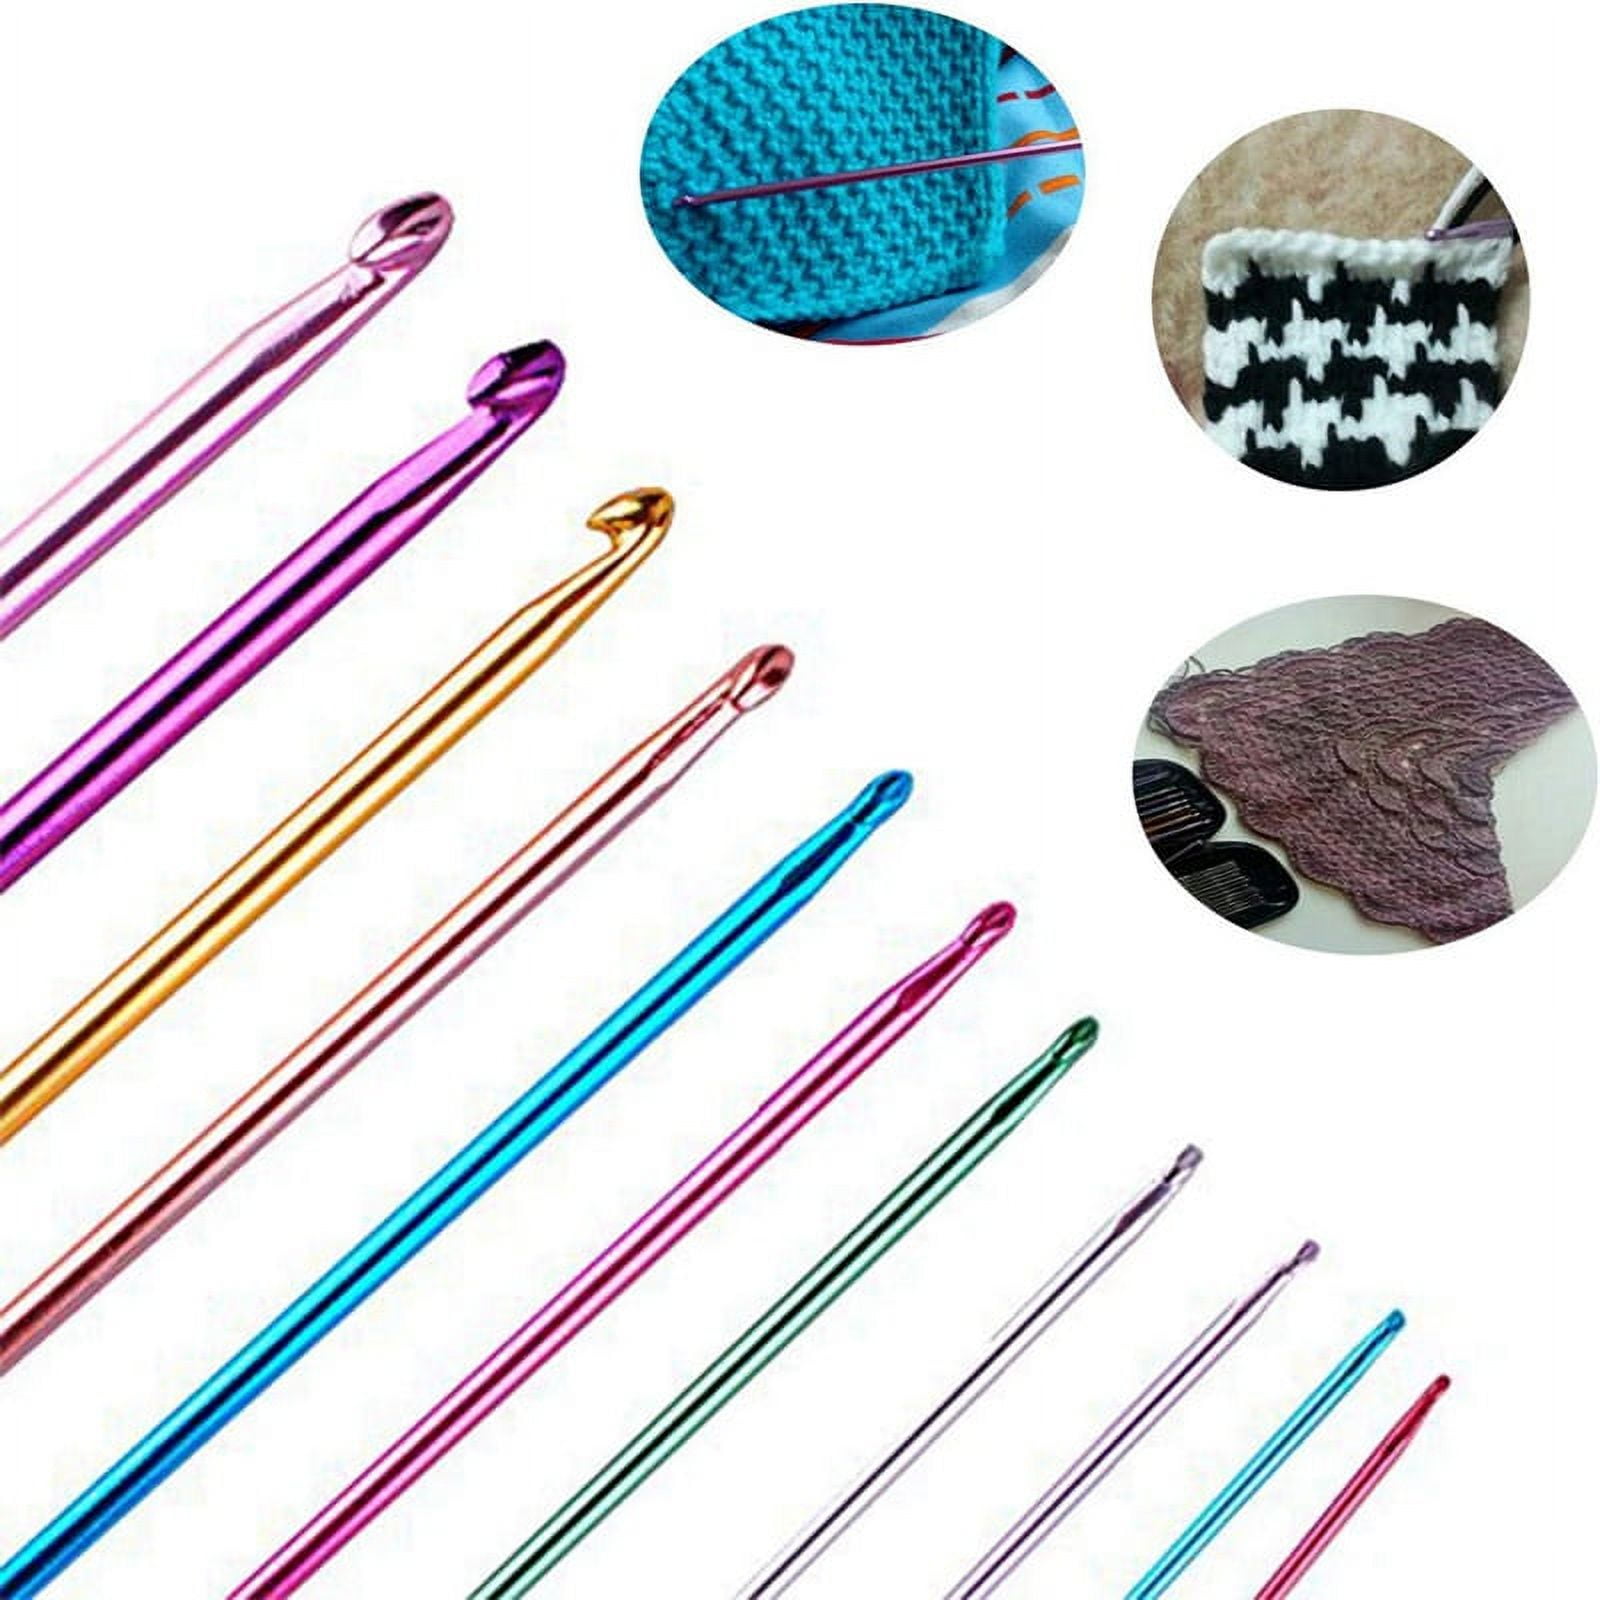 47-Inch (120cm) Tunisian Crochet Hooks Set with Cable, 12 US Sizes from E to O (3.5-12mm) - Perfect for Baby Afghan Blankets